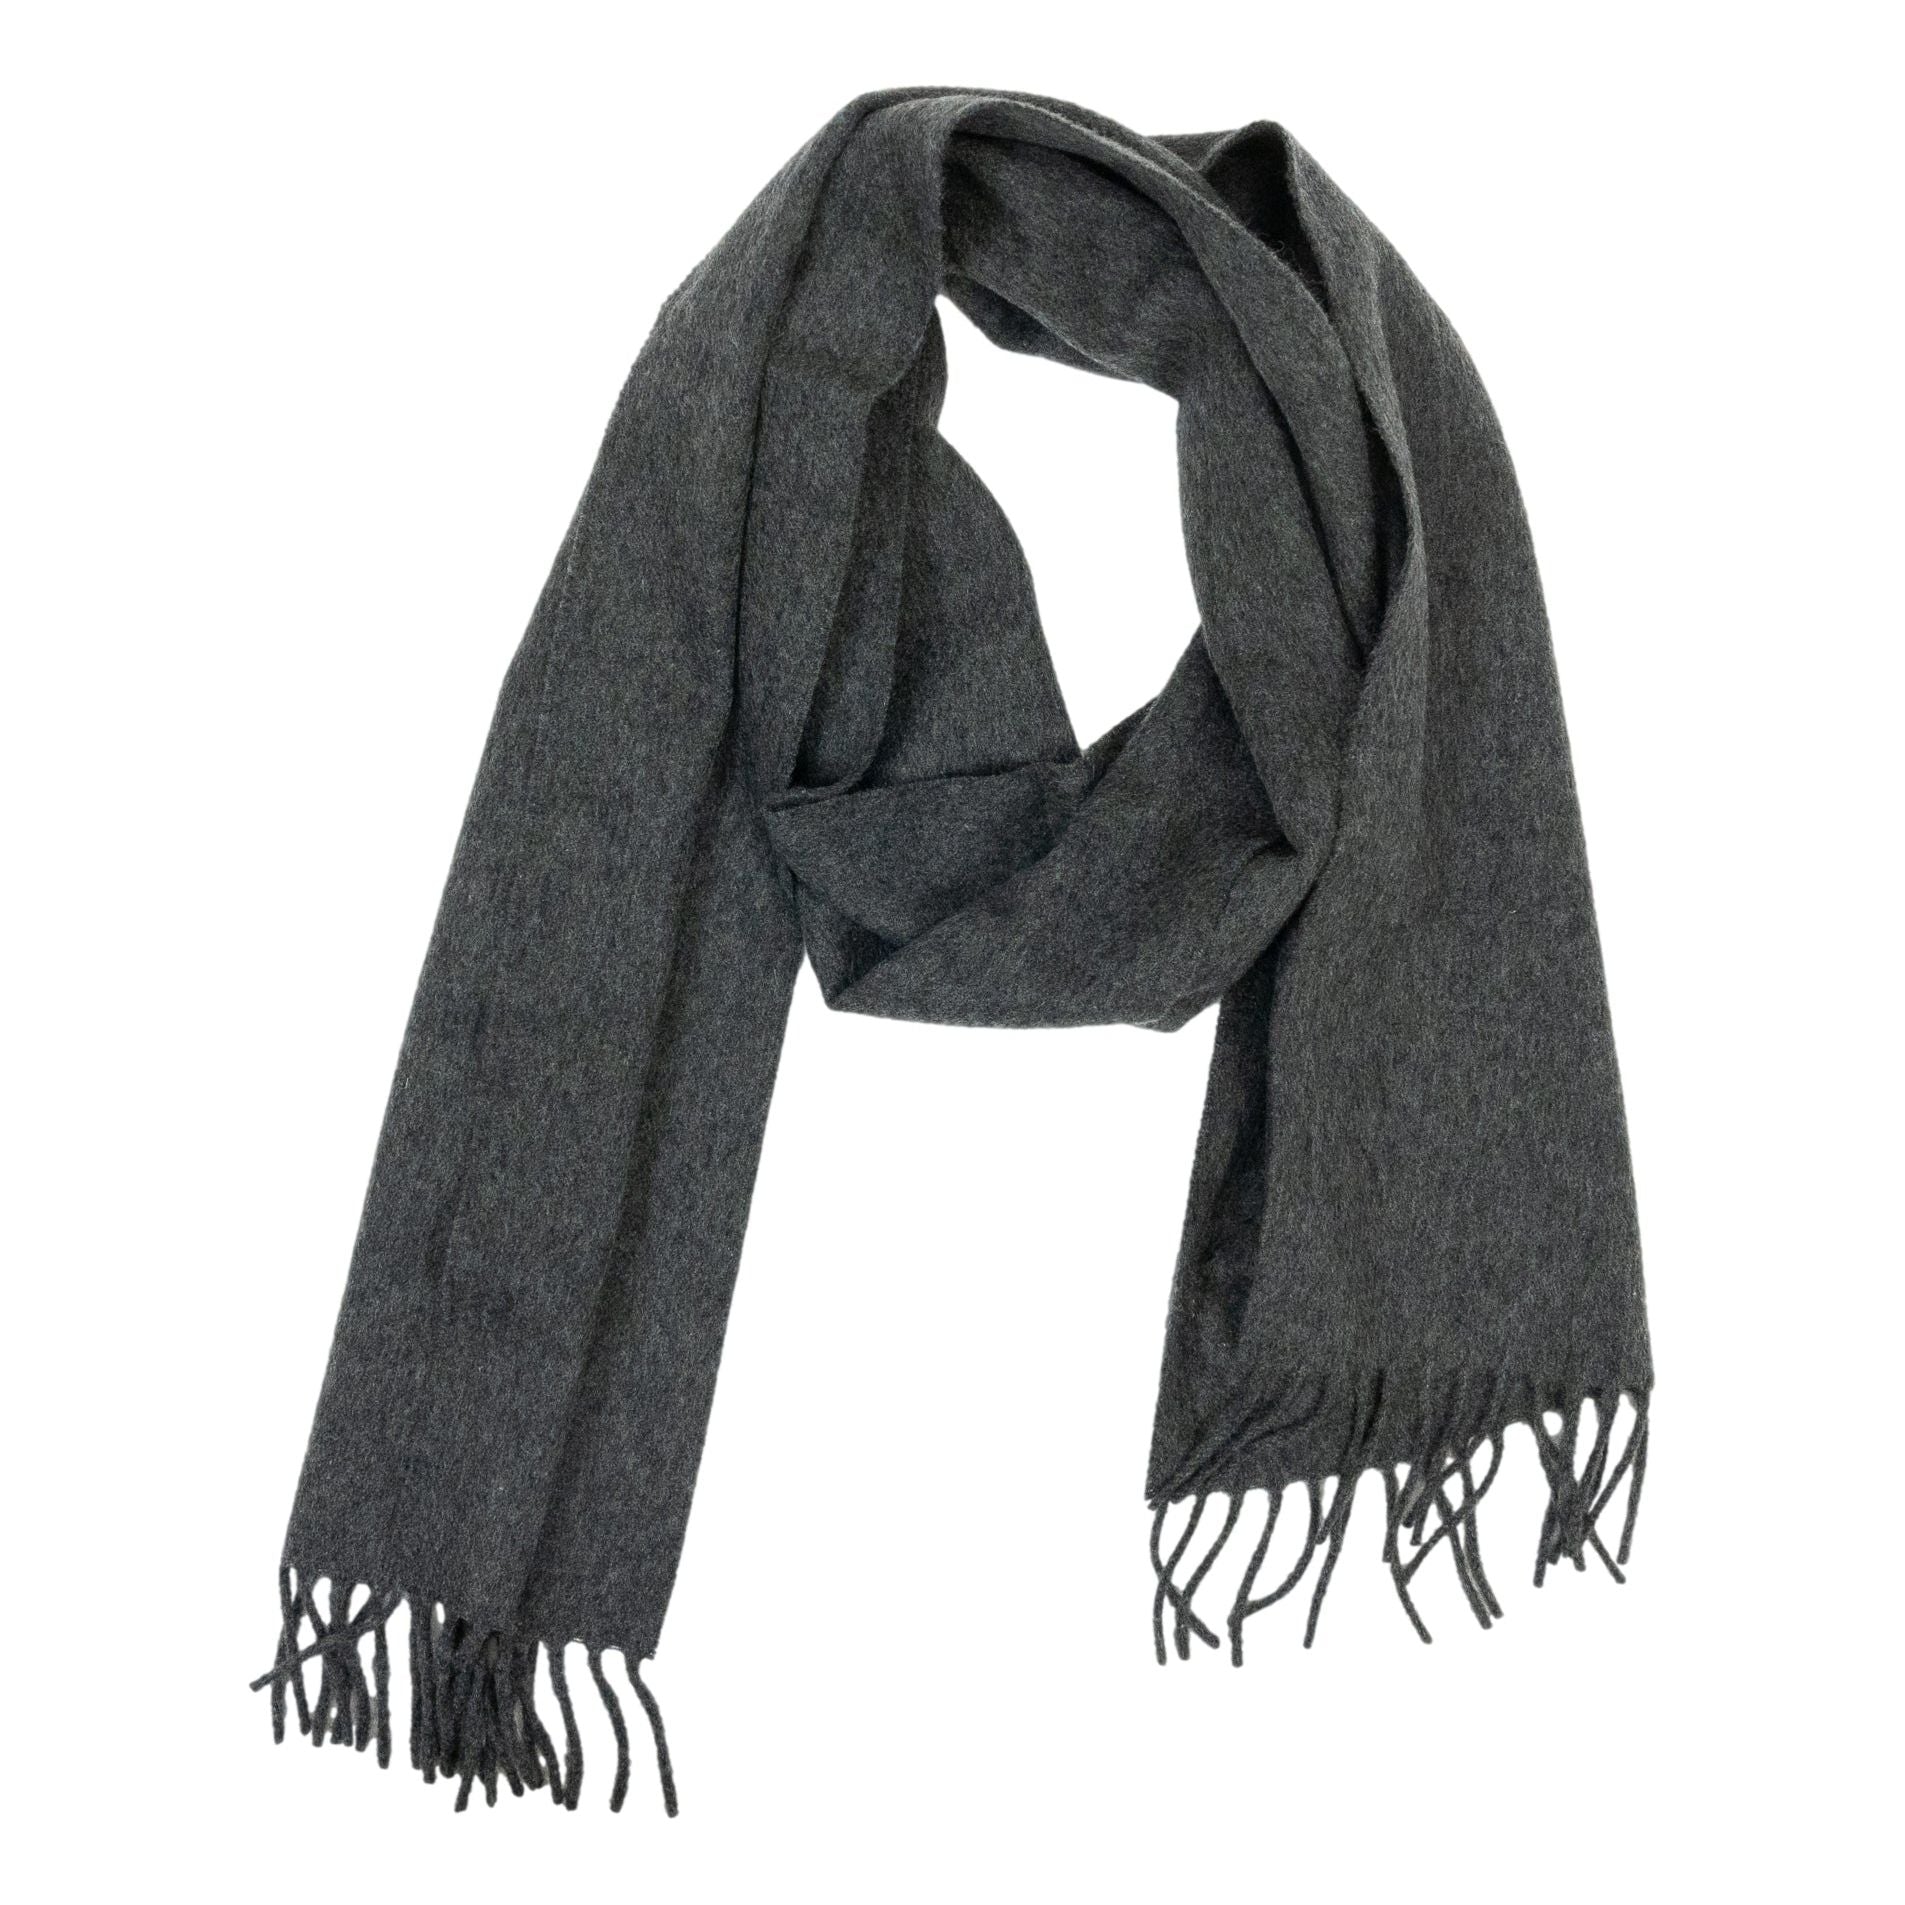 Classic 100% Solid Cashmere Scarf